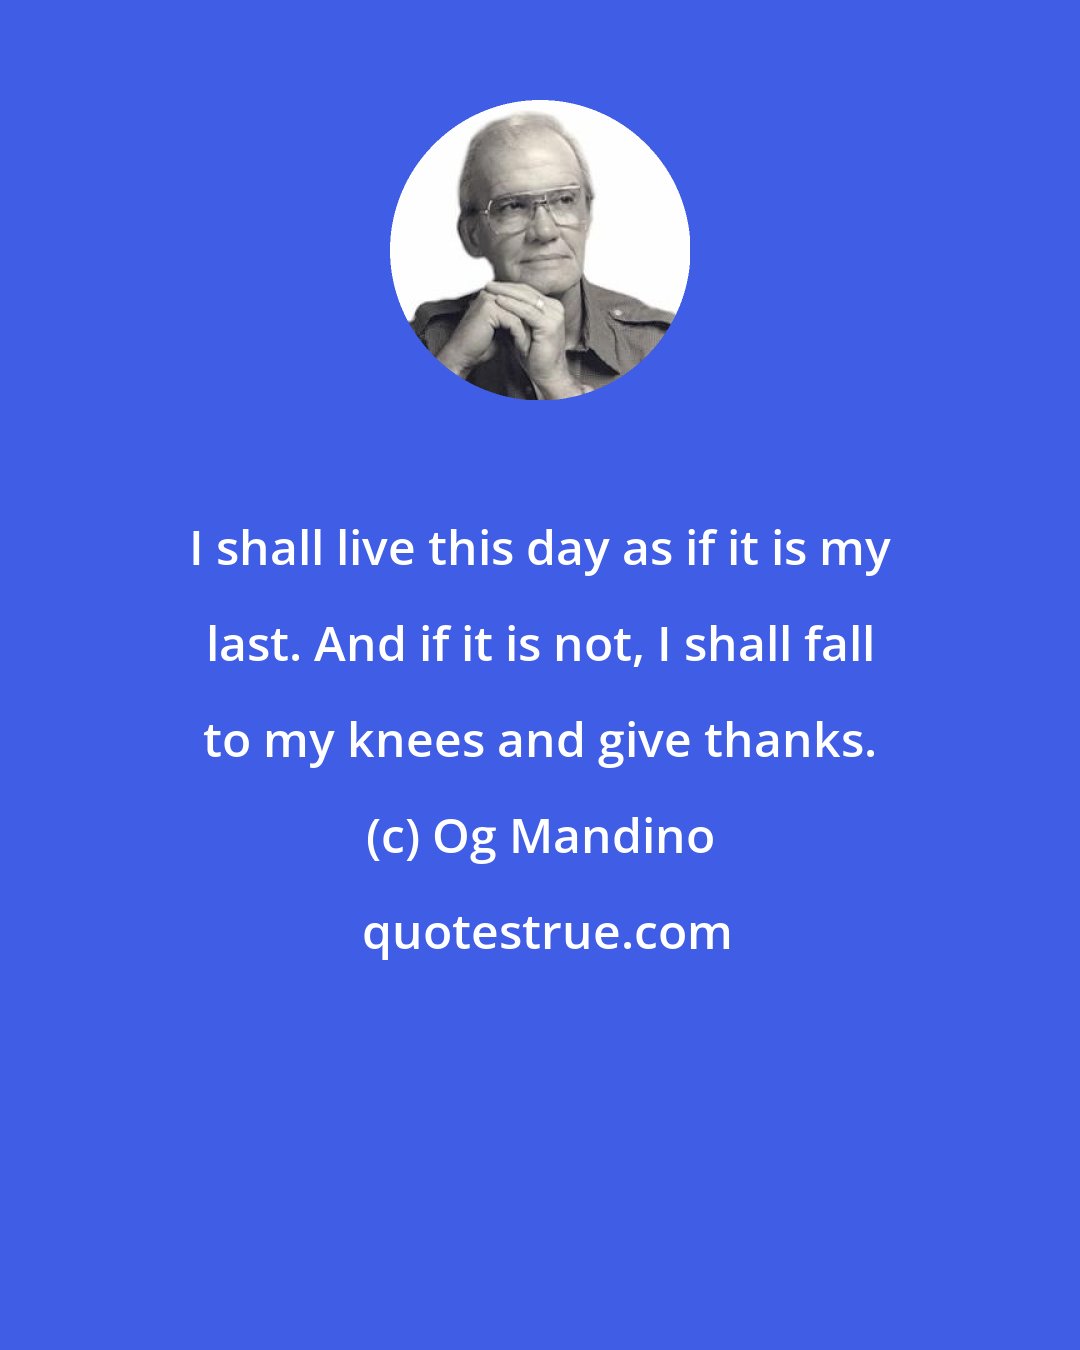 Og Mandino: I shall live this day as if it is my last. And if it is not, I shall fall to my knees and give thanks.